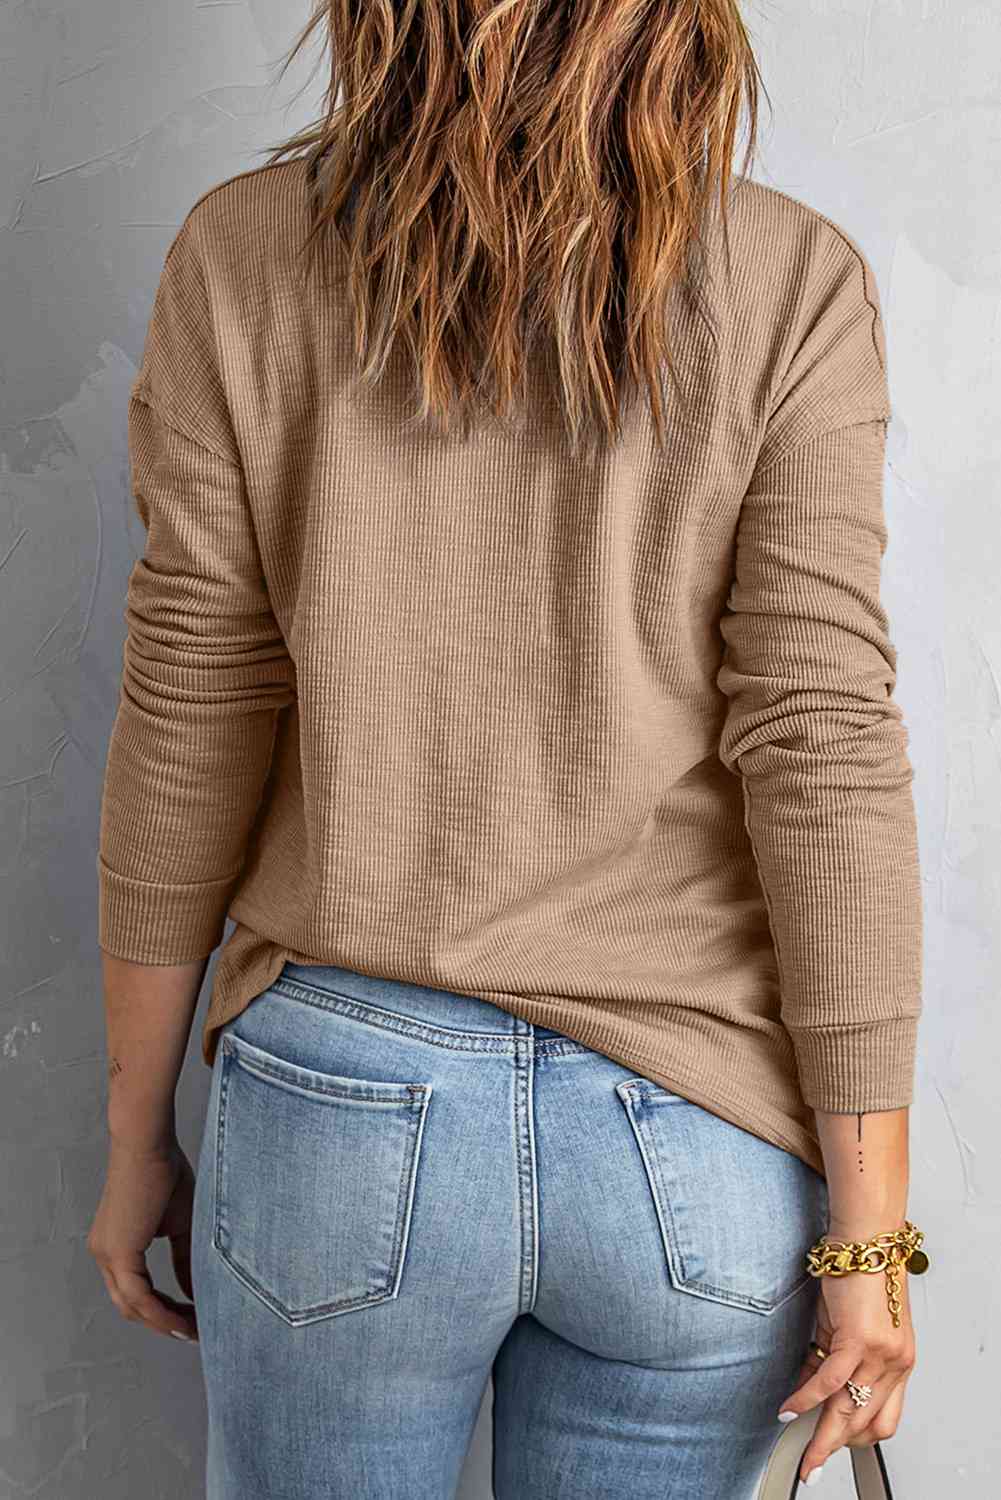 Half Button Collared Knit Top - Tophatter Deals